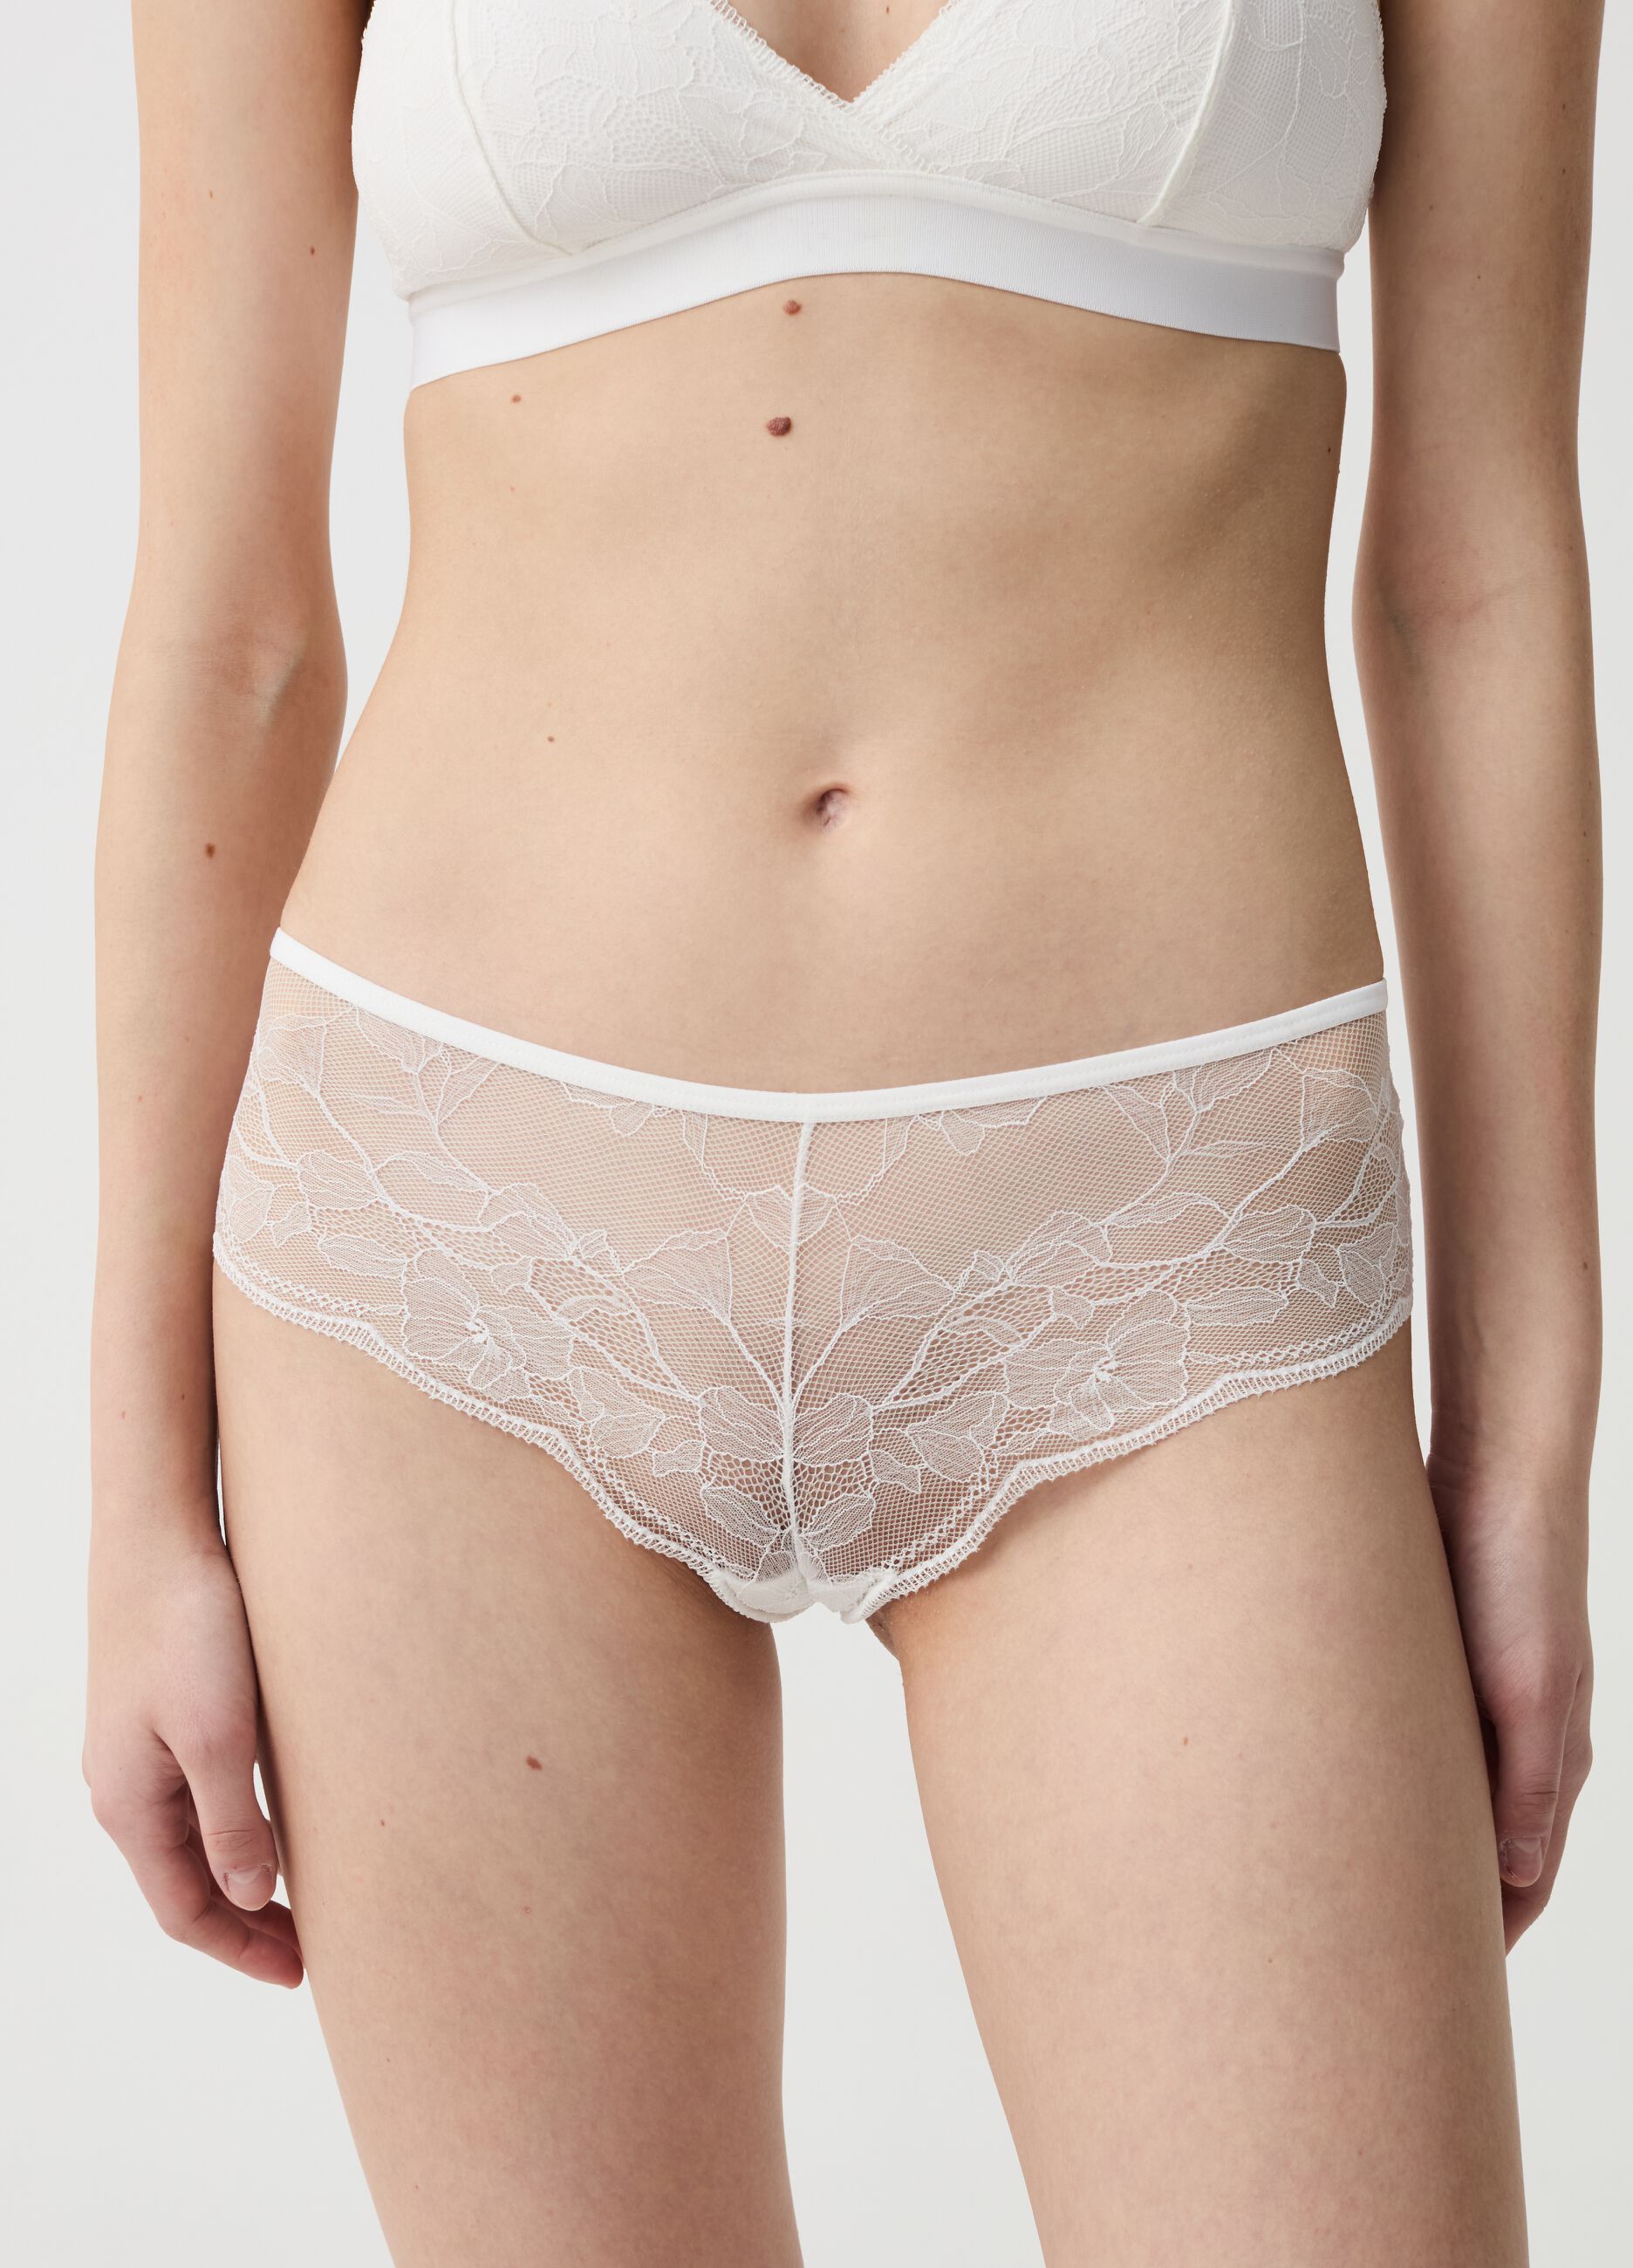 French knickers in floral lace